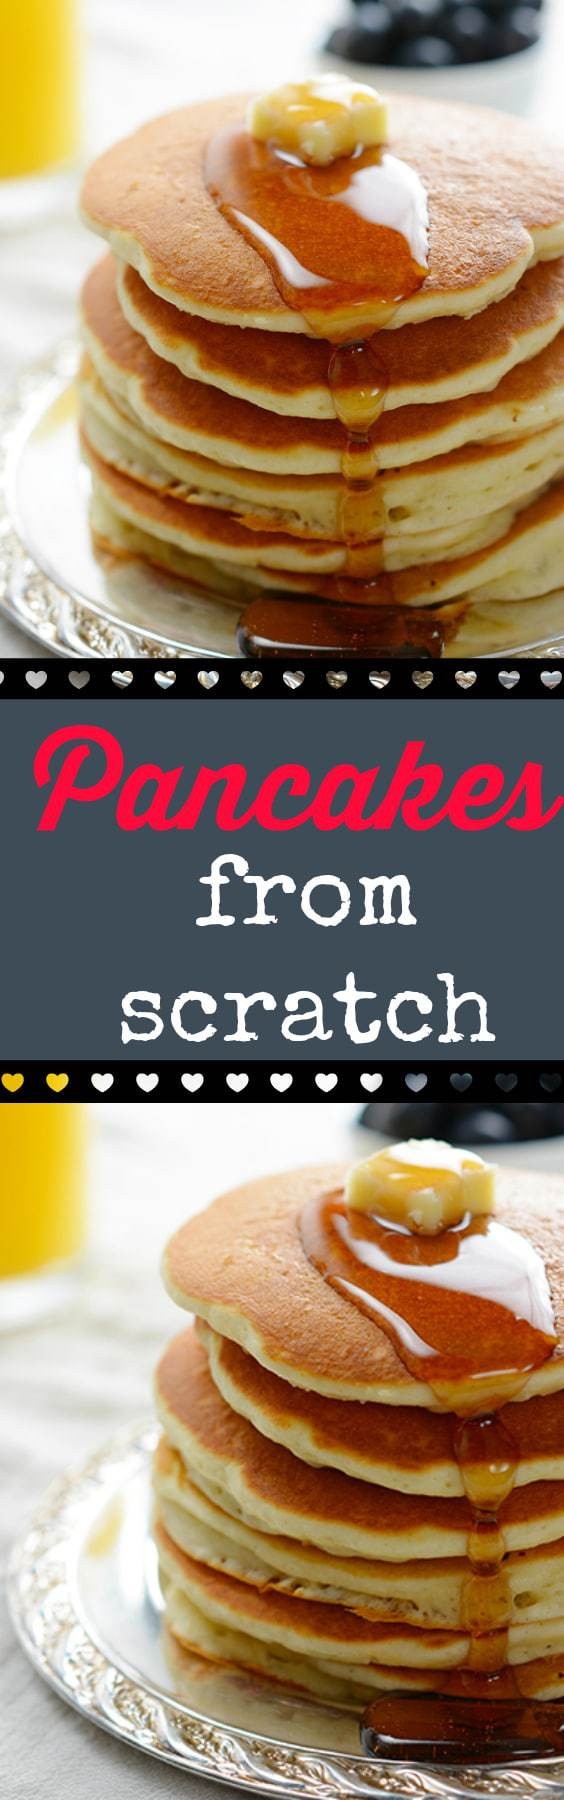 From Scratch Pancakes
 Pancakes From Scratch The Kitchen Magpie